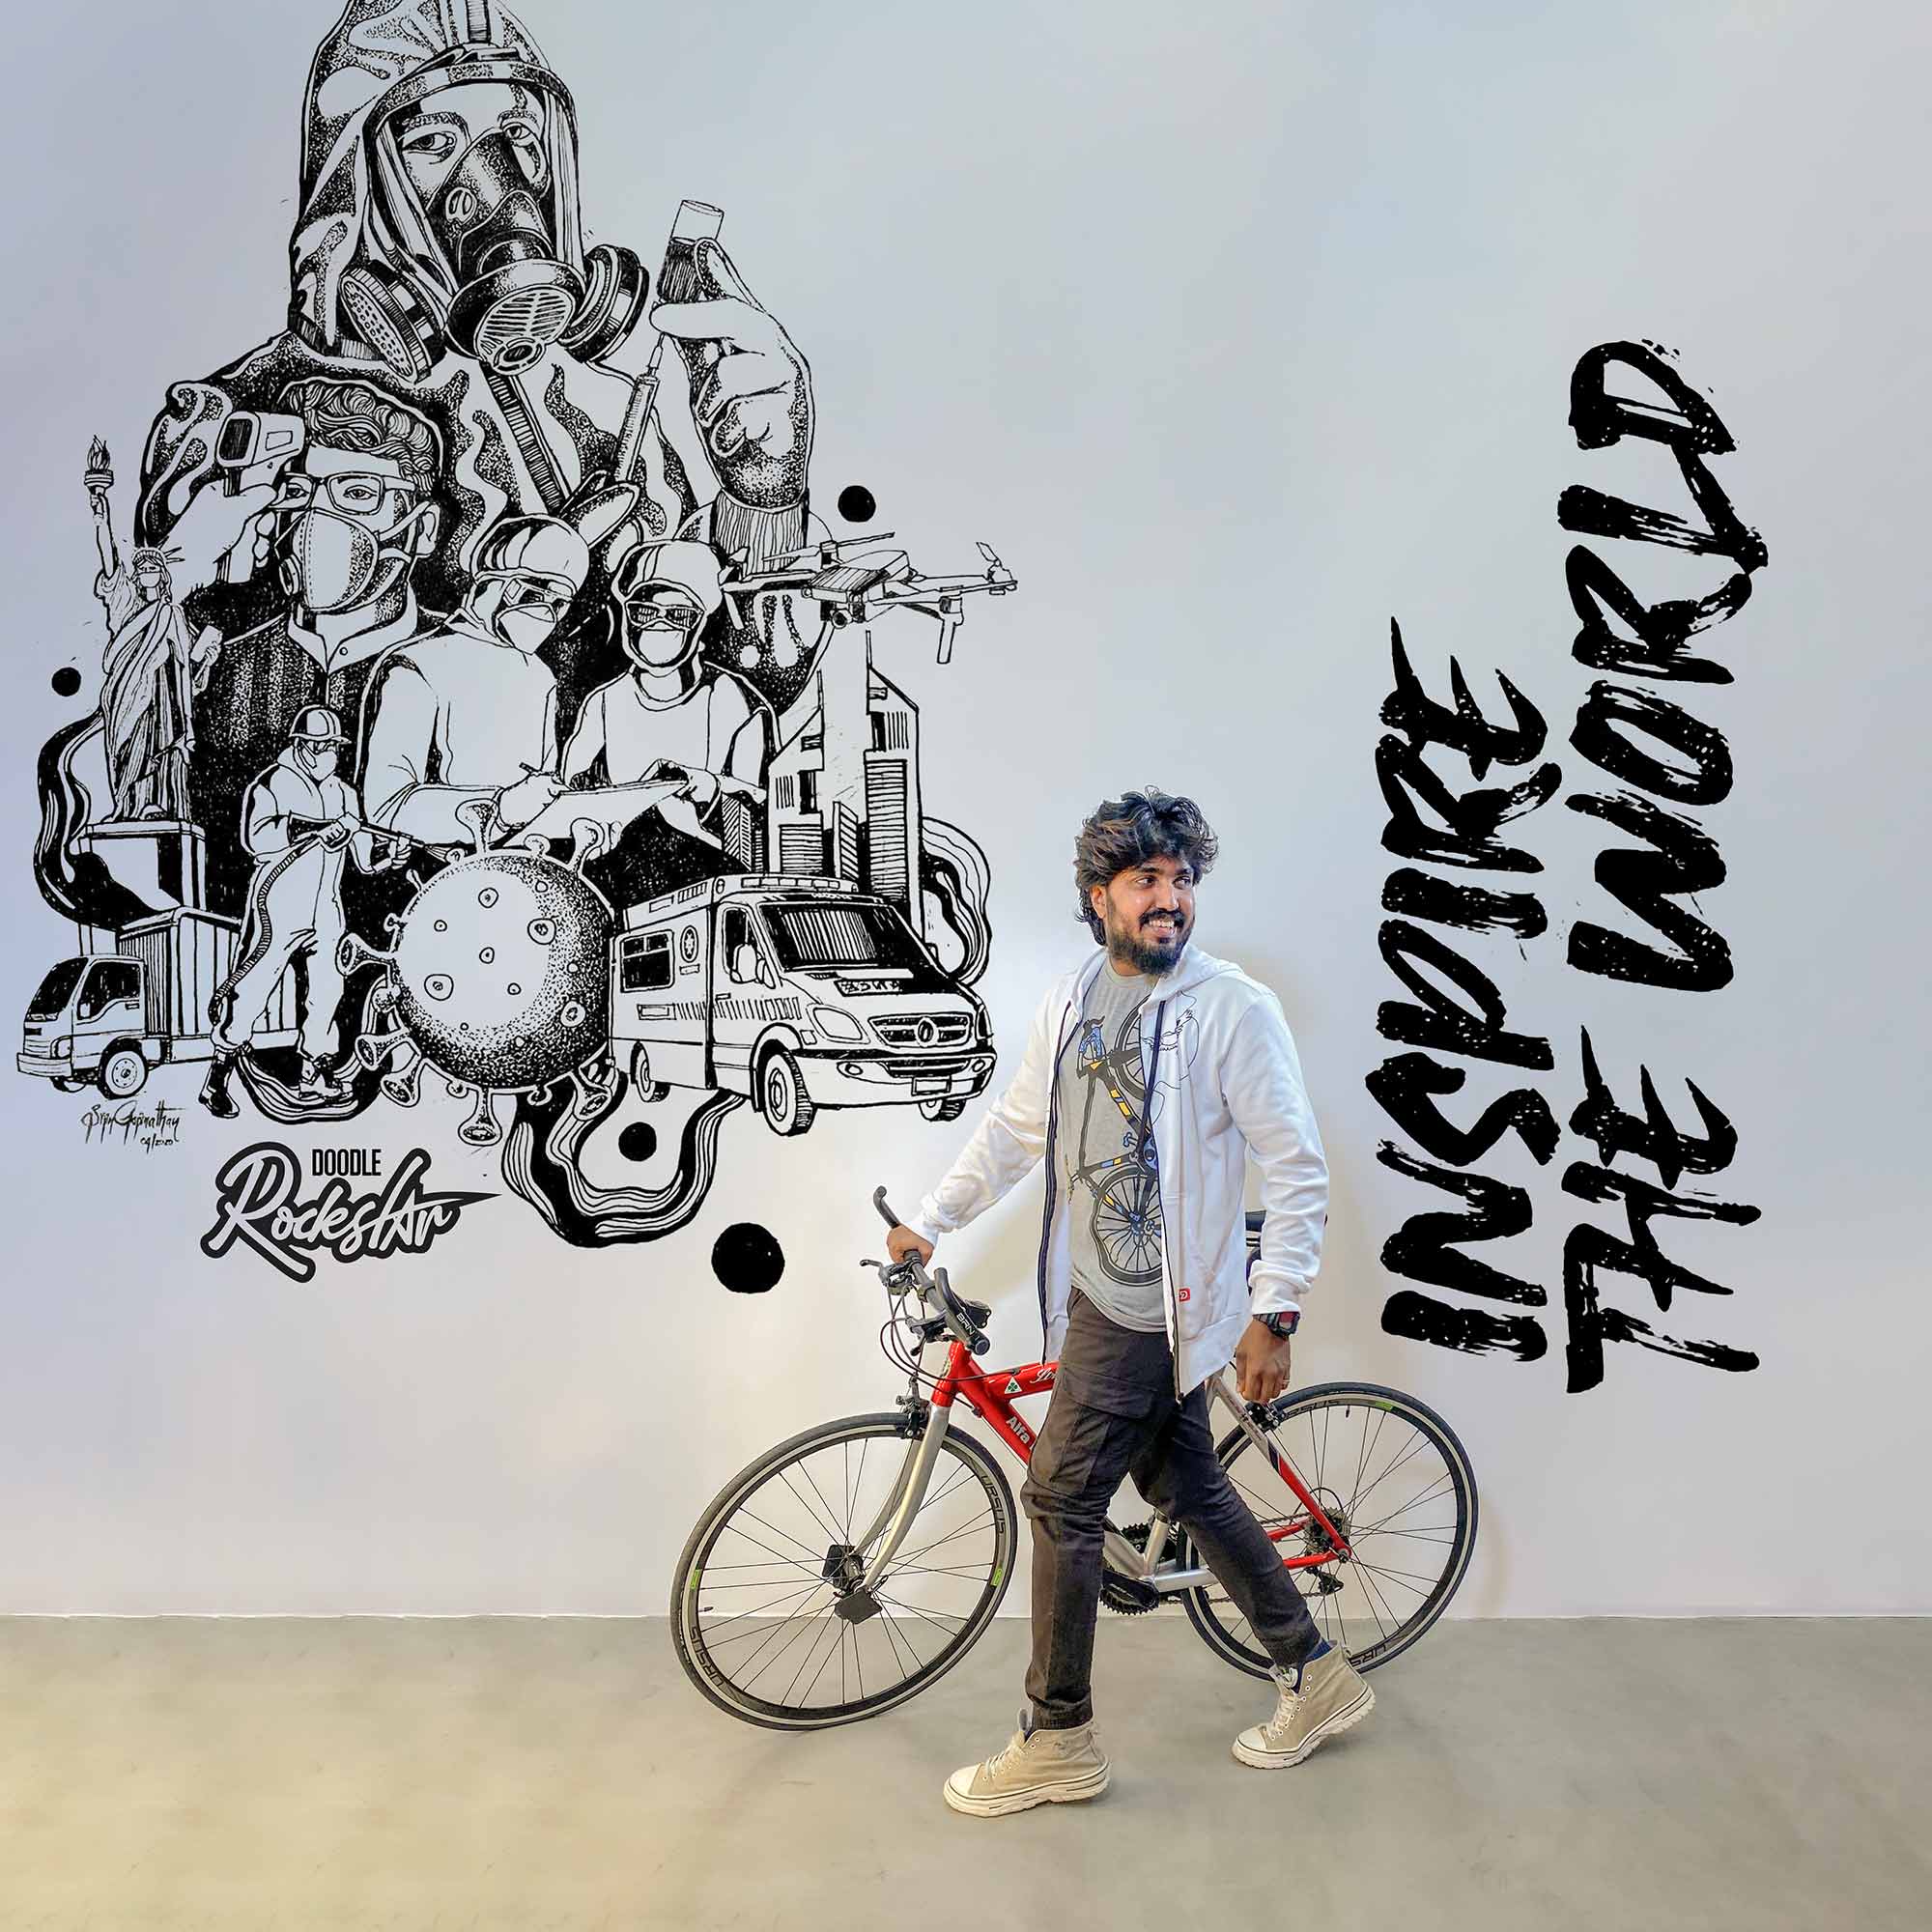 Concept art of "Inspire the world" Artwork Campaign by Thee Artist Network